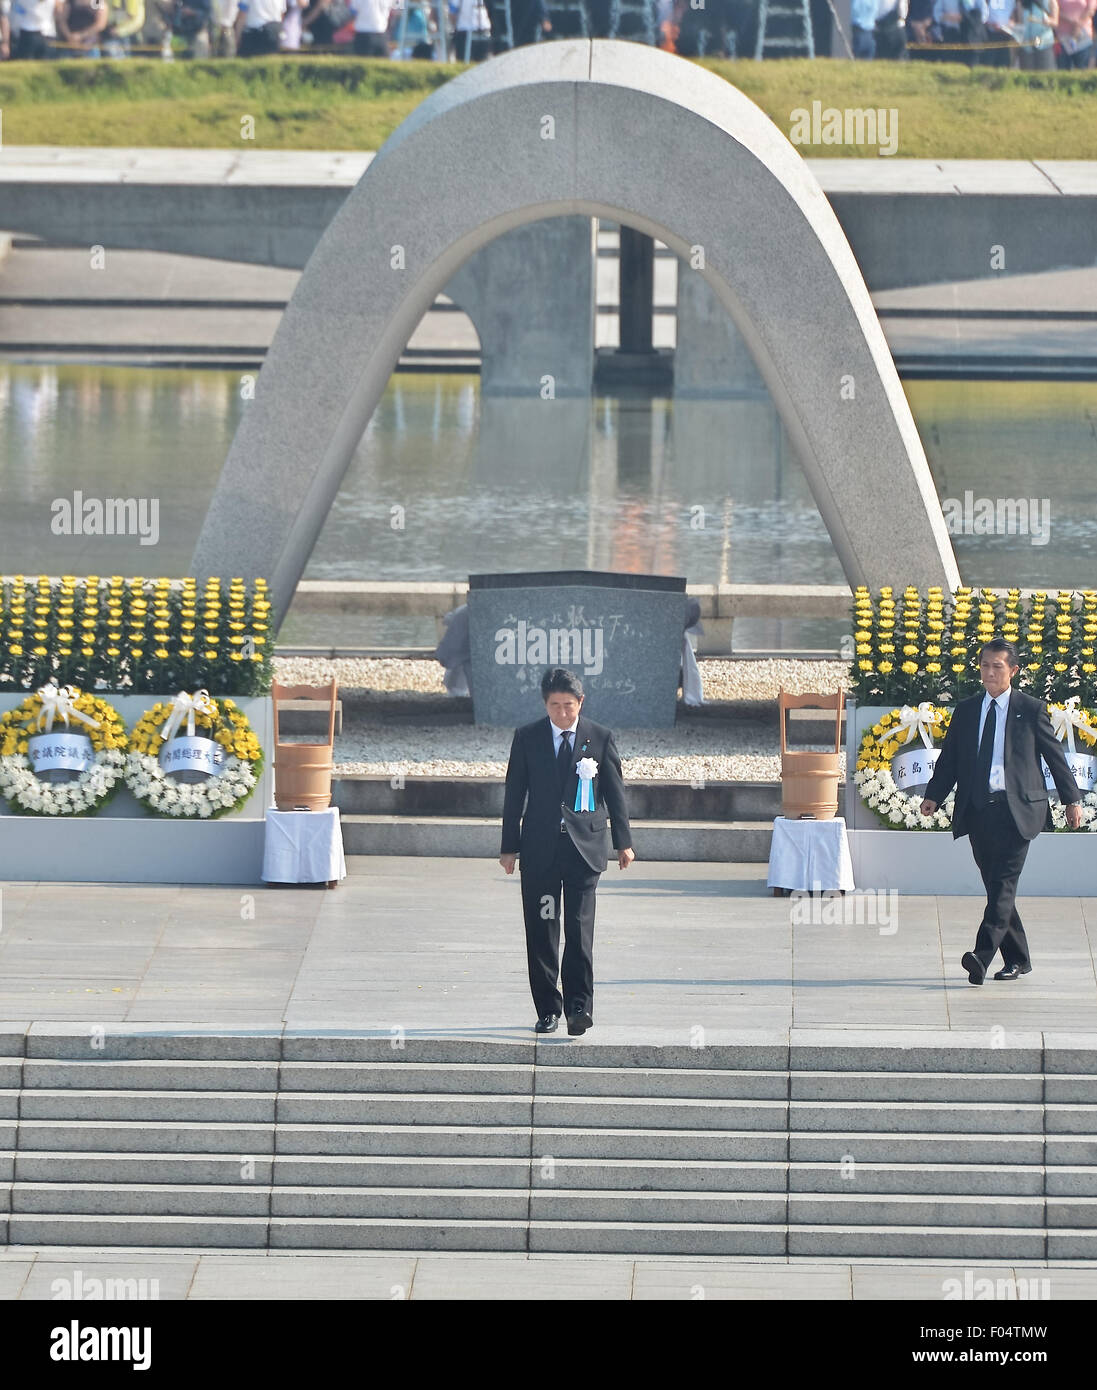 Shinzo Abe, Hiroshima, Japan. 6th August, 2015. Japan's Prime Minister Shinzo Abe attends a ceremony at Hiroshima Peace Memorial Park marking the 70th anniversary of the atomic bombing in Hiroshima, Japan, on August 6, 2015. Credit:  AFLO/Alamy Live News Stock Photo